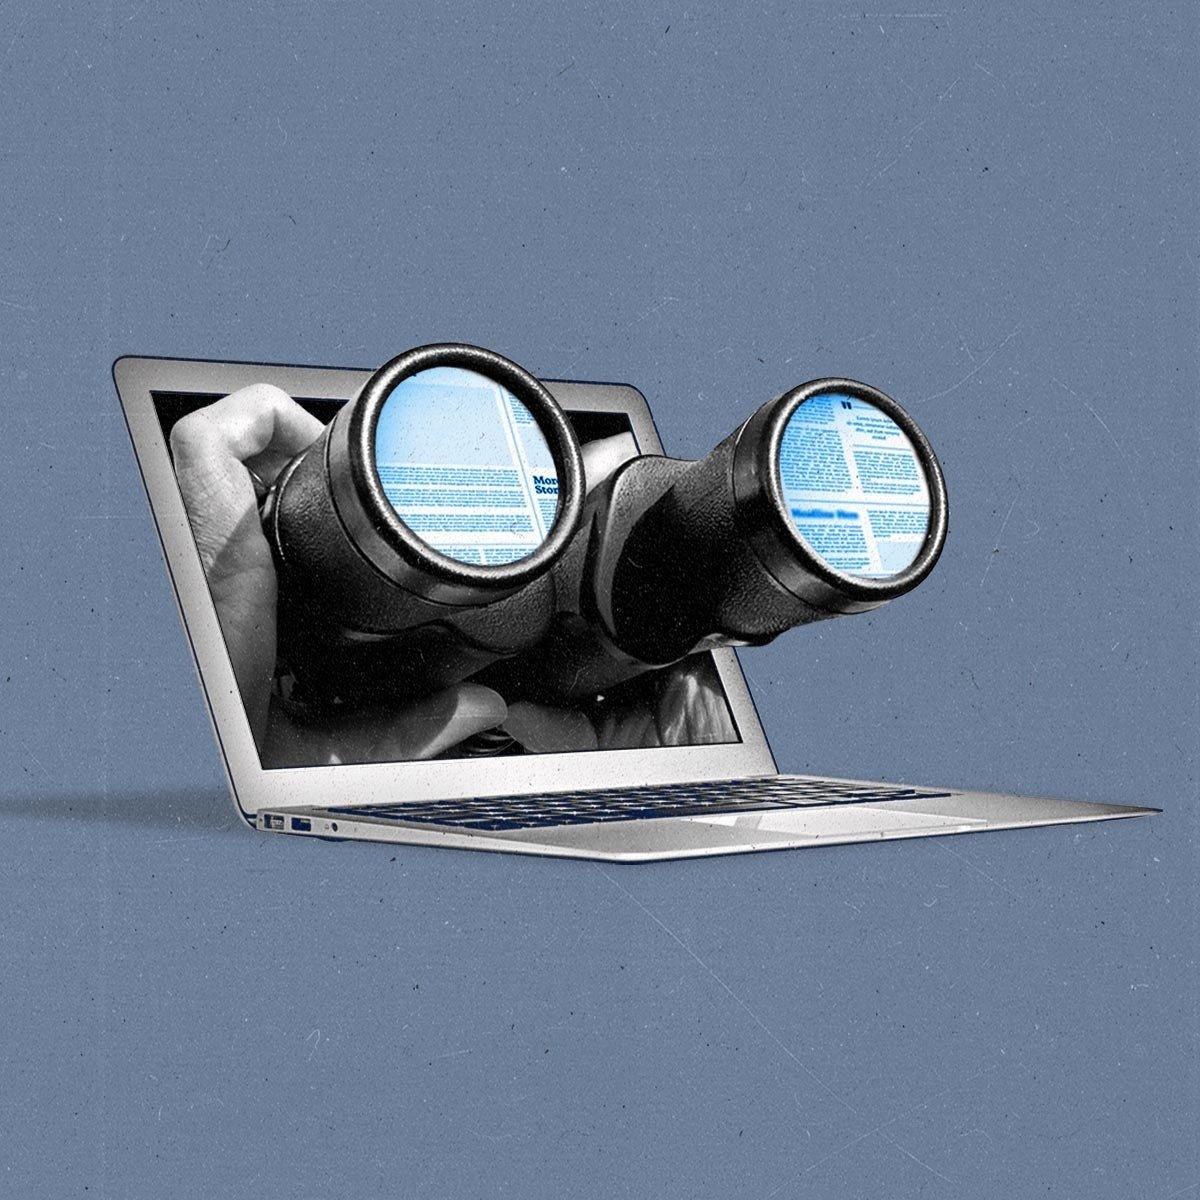 A pair of hands holds binoculars through a laptop, with the reflection of news websites in the lenses.